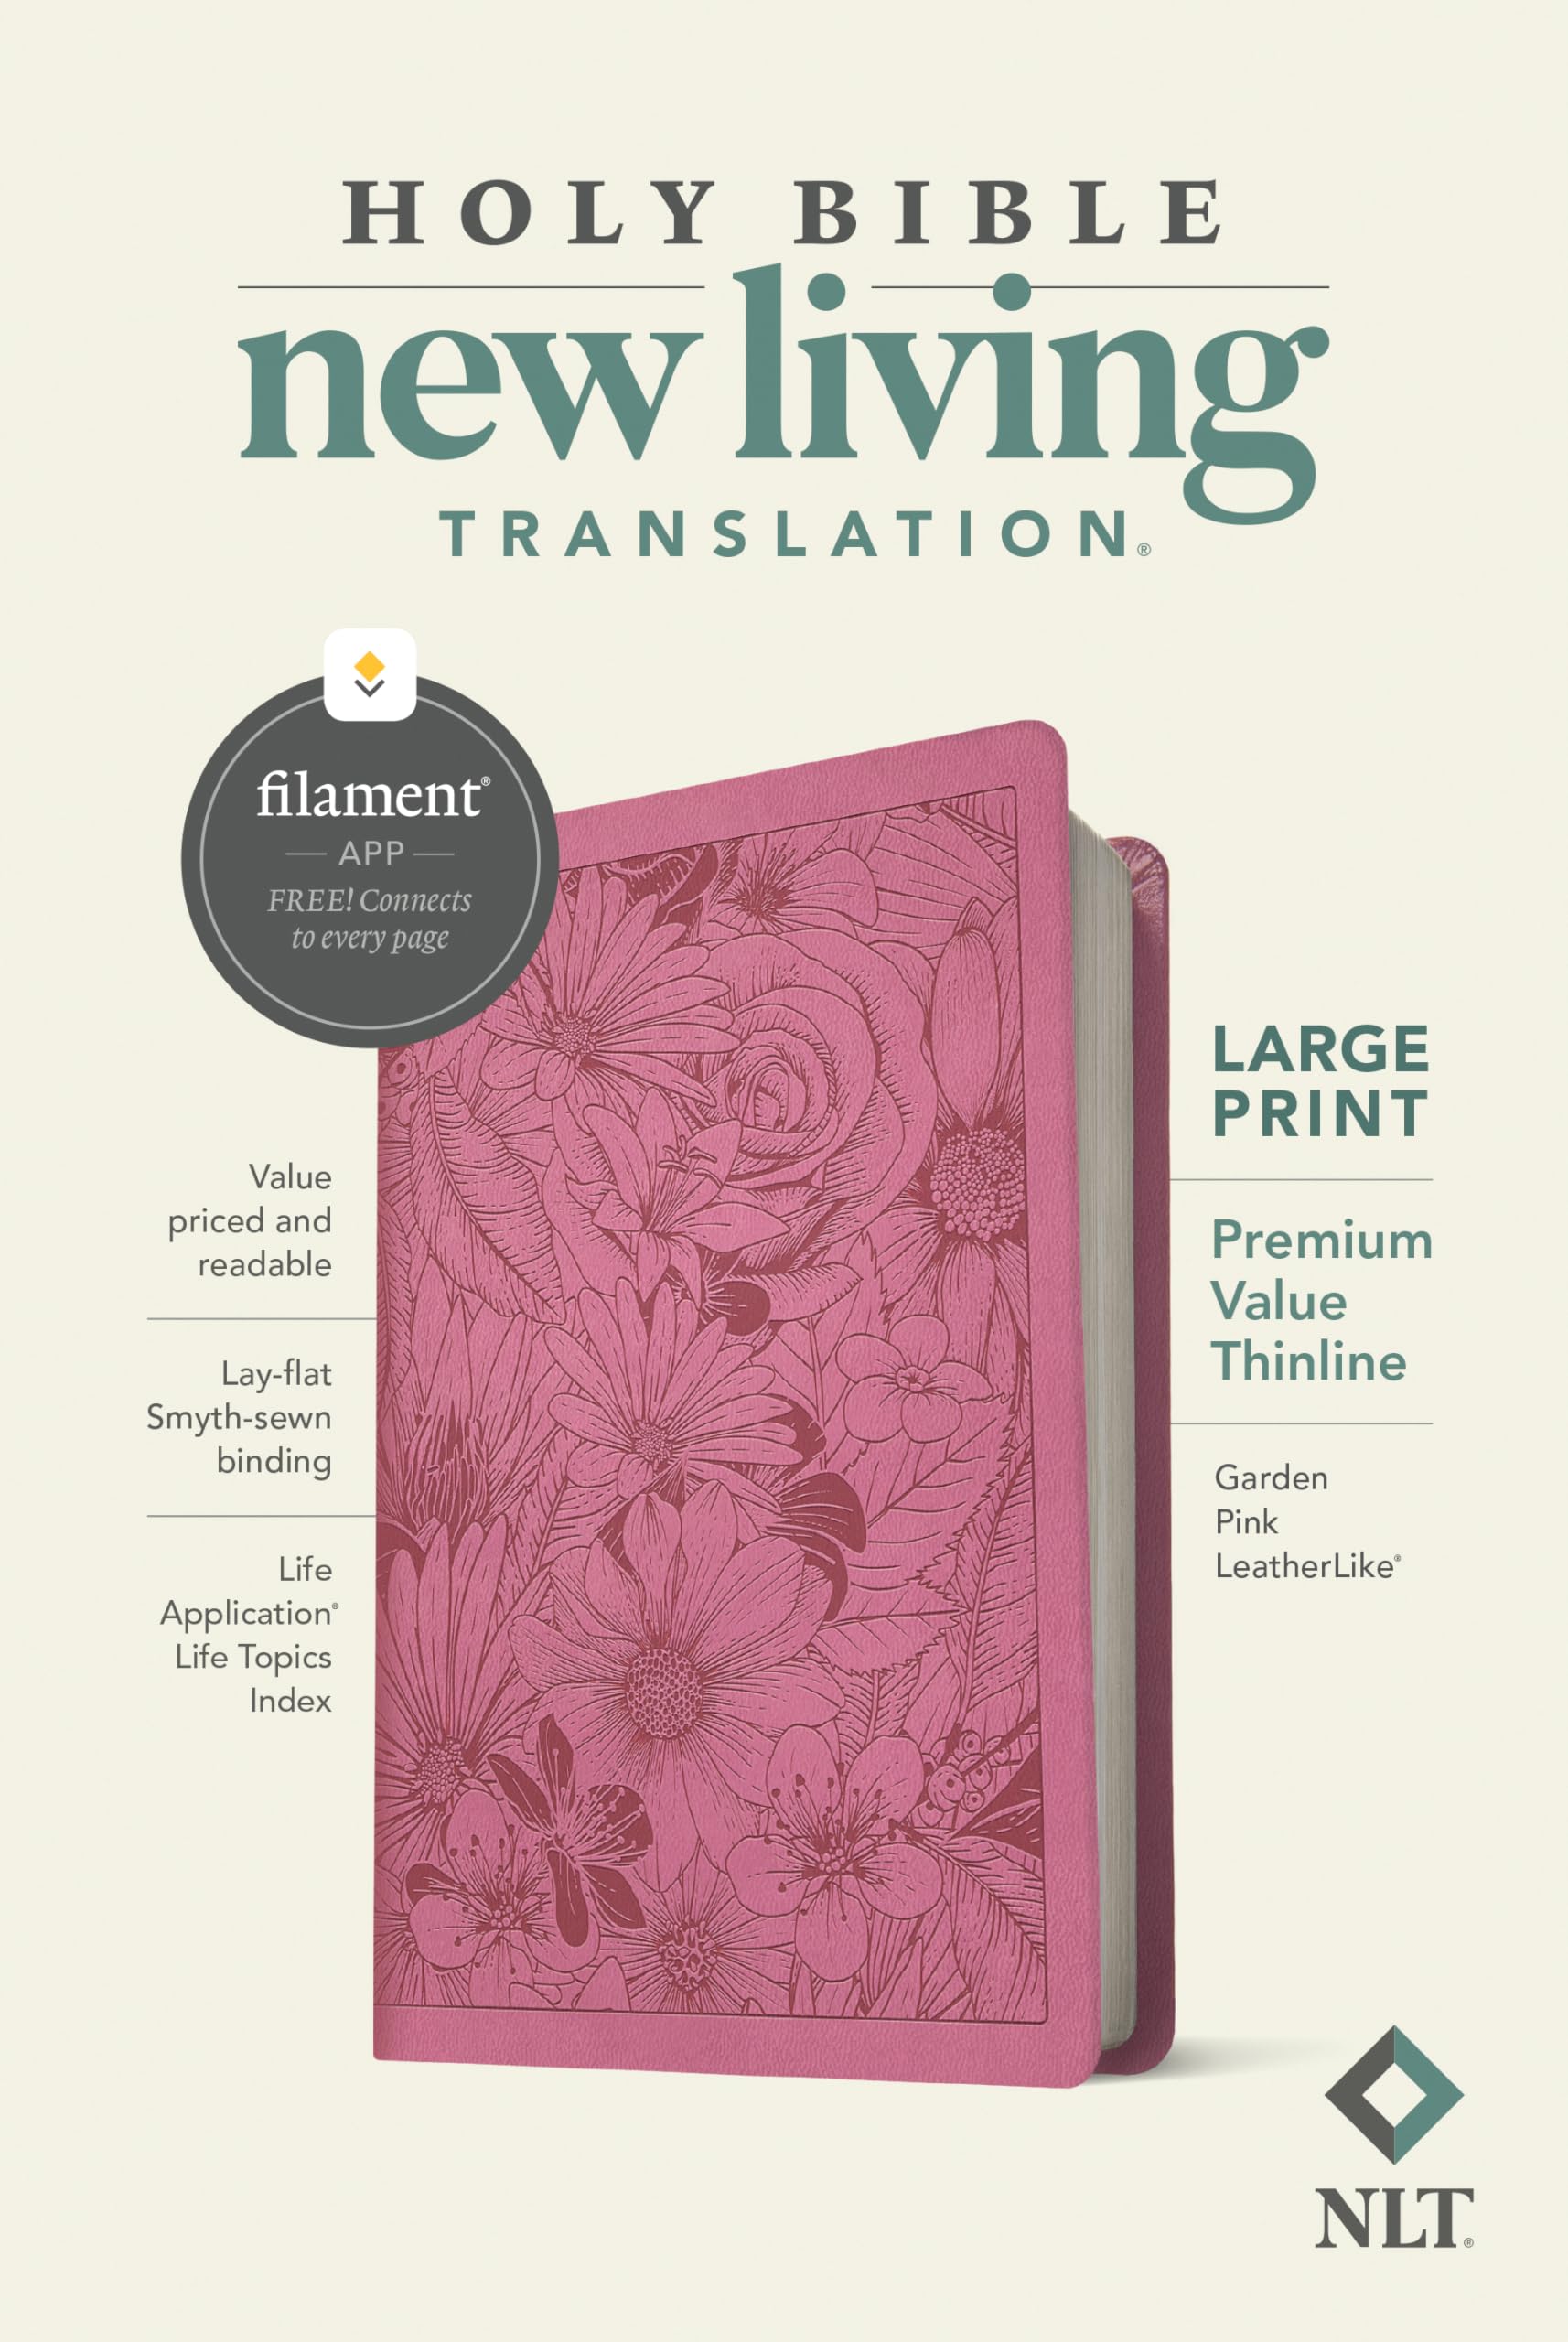 NLT Large Print Premium Value Thinline Bible, Filament Enabled Edition (Leatherlike, Garden Pink) by Tyndale